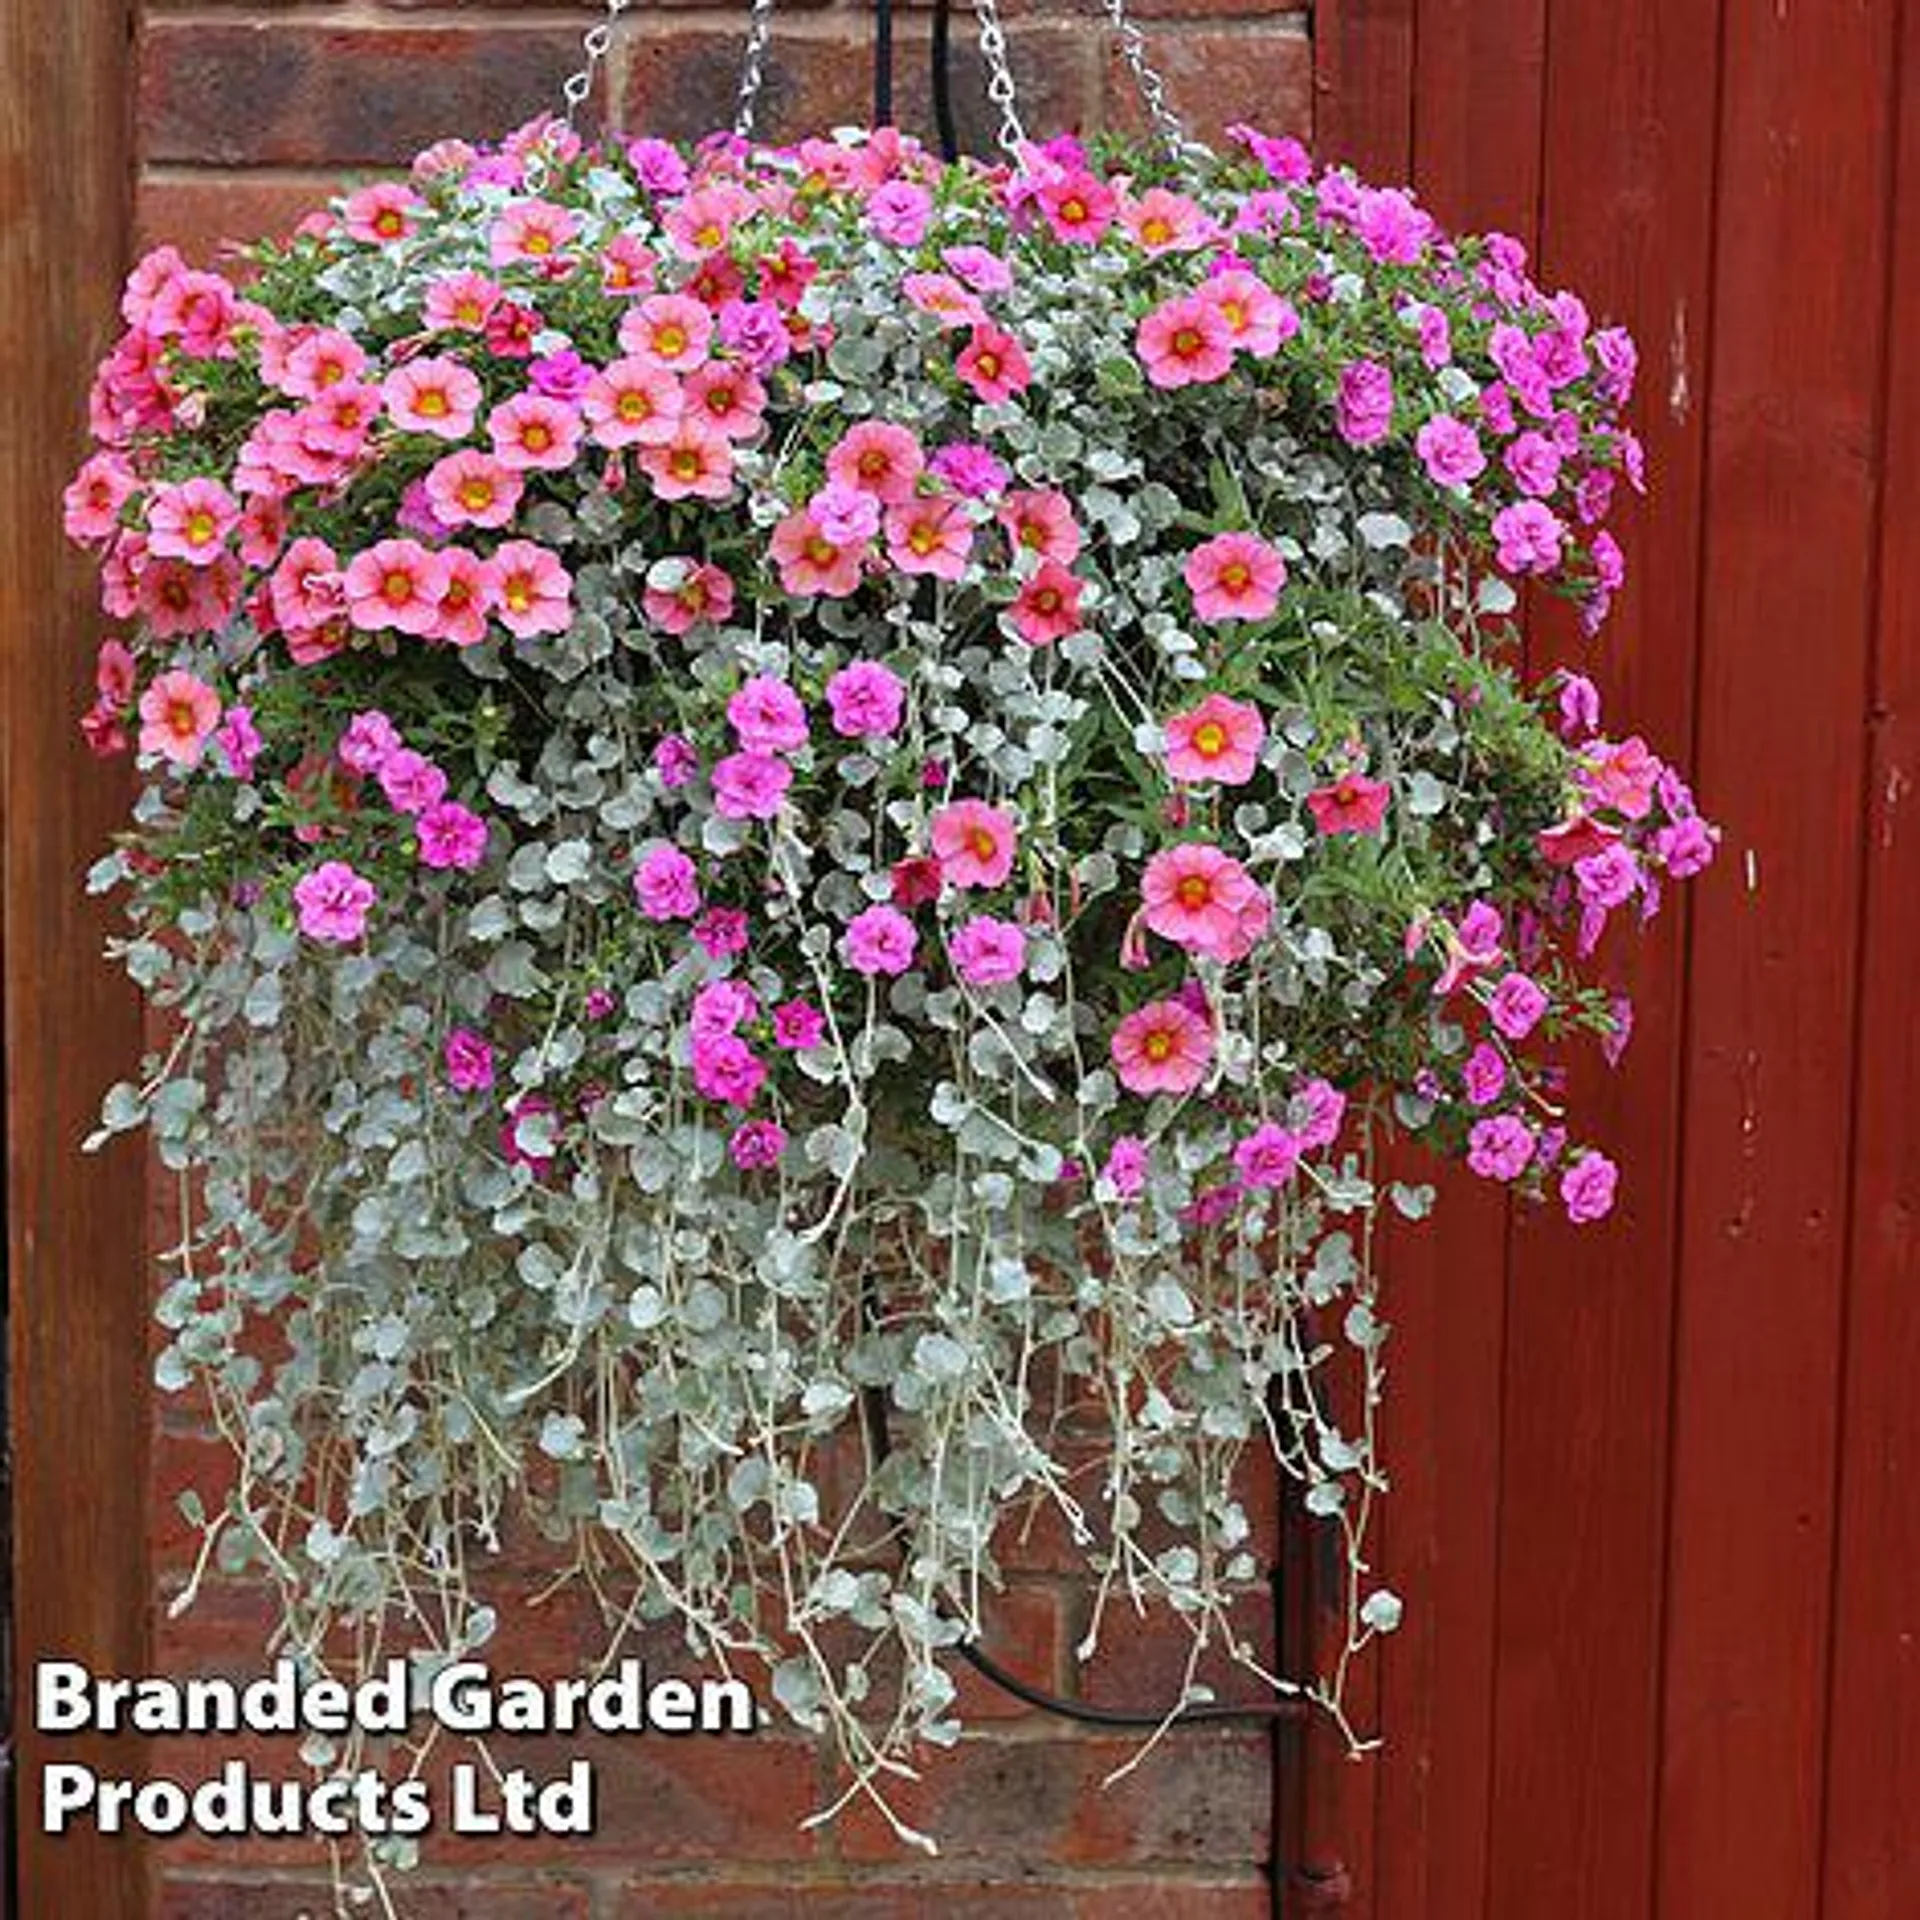 Buy two 25cm Pre-Planted Baskets ONLY £29.99